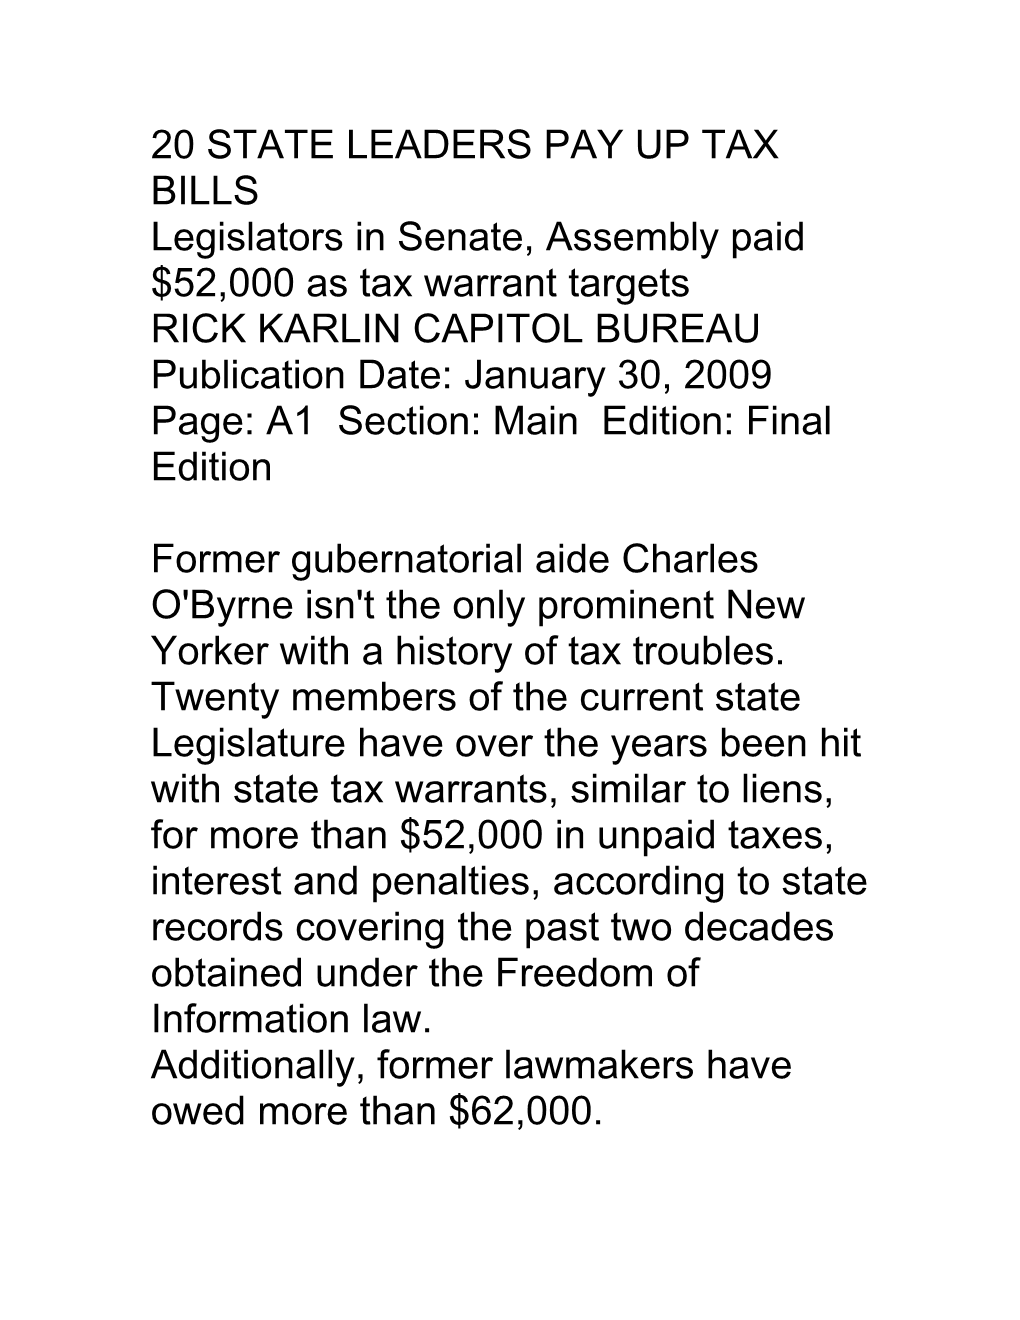 20 State Leaders Pay up Tax Bills